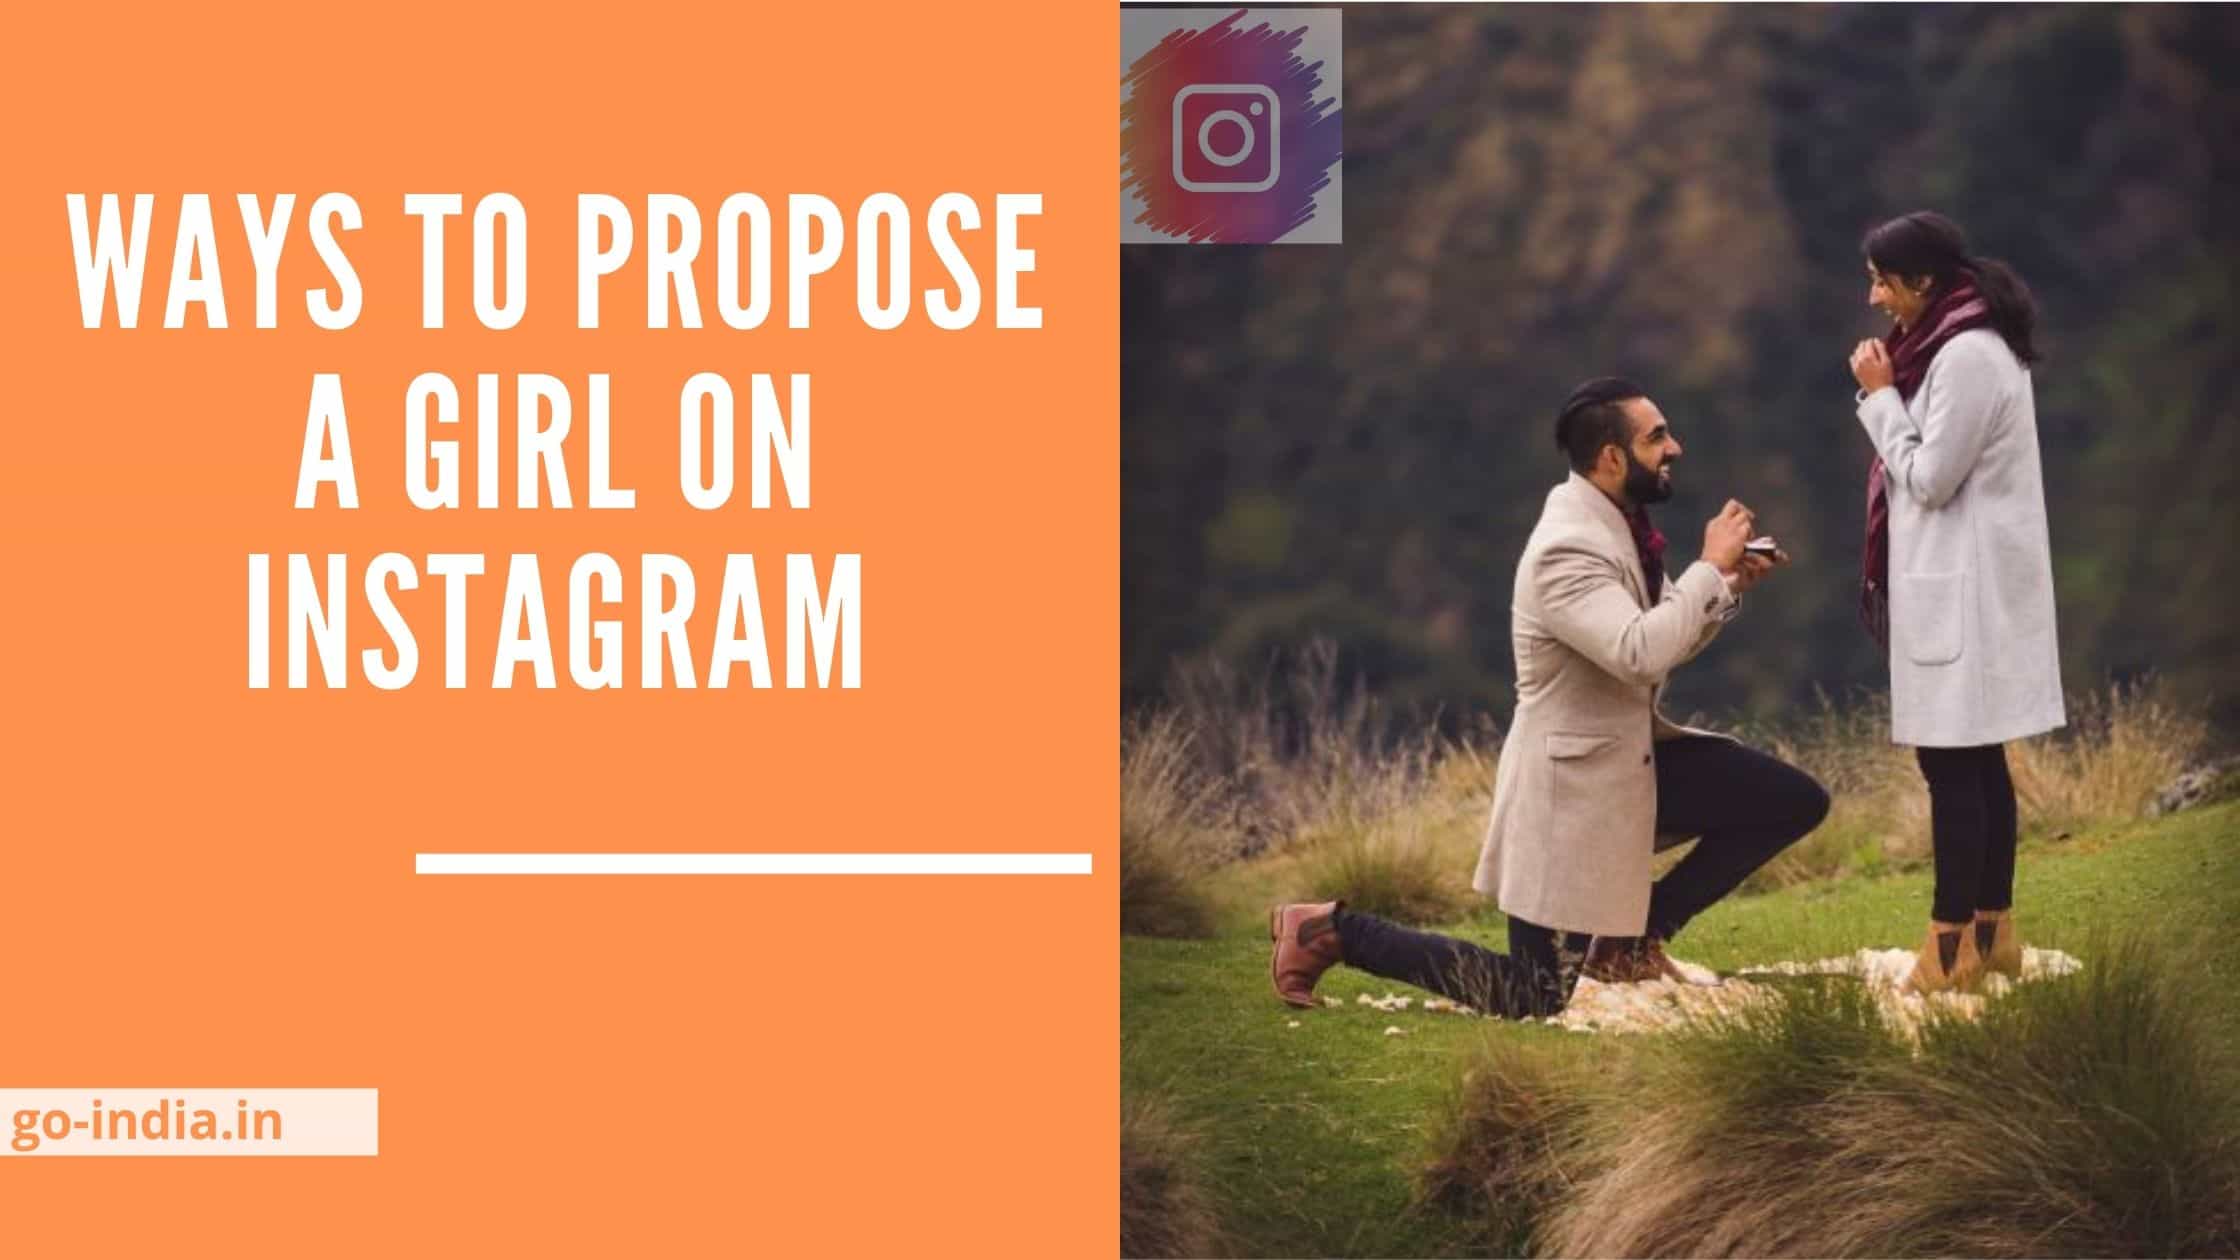 Ways to Propose a Girl on Instagram